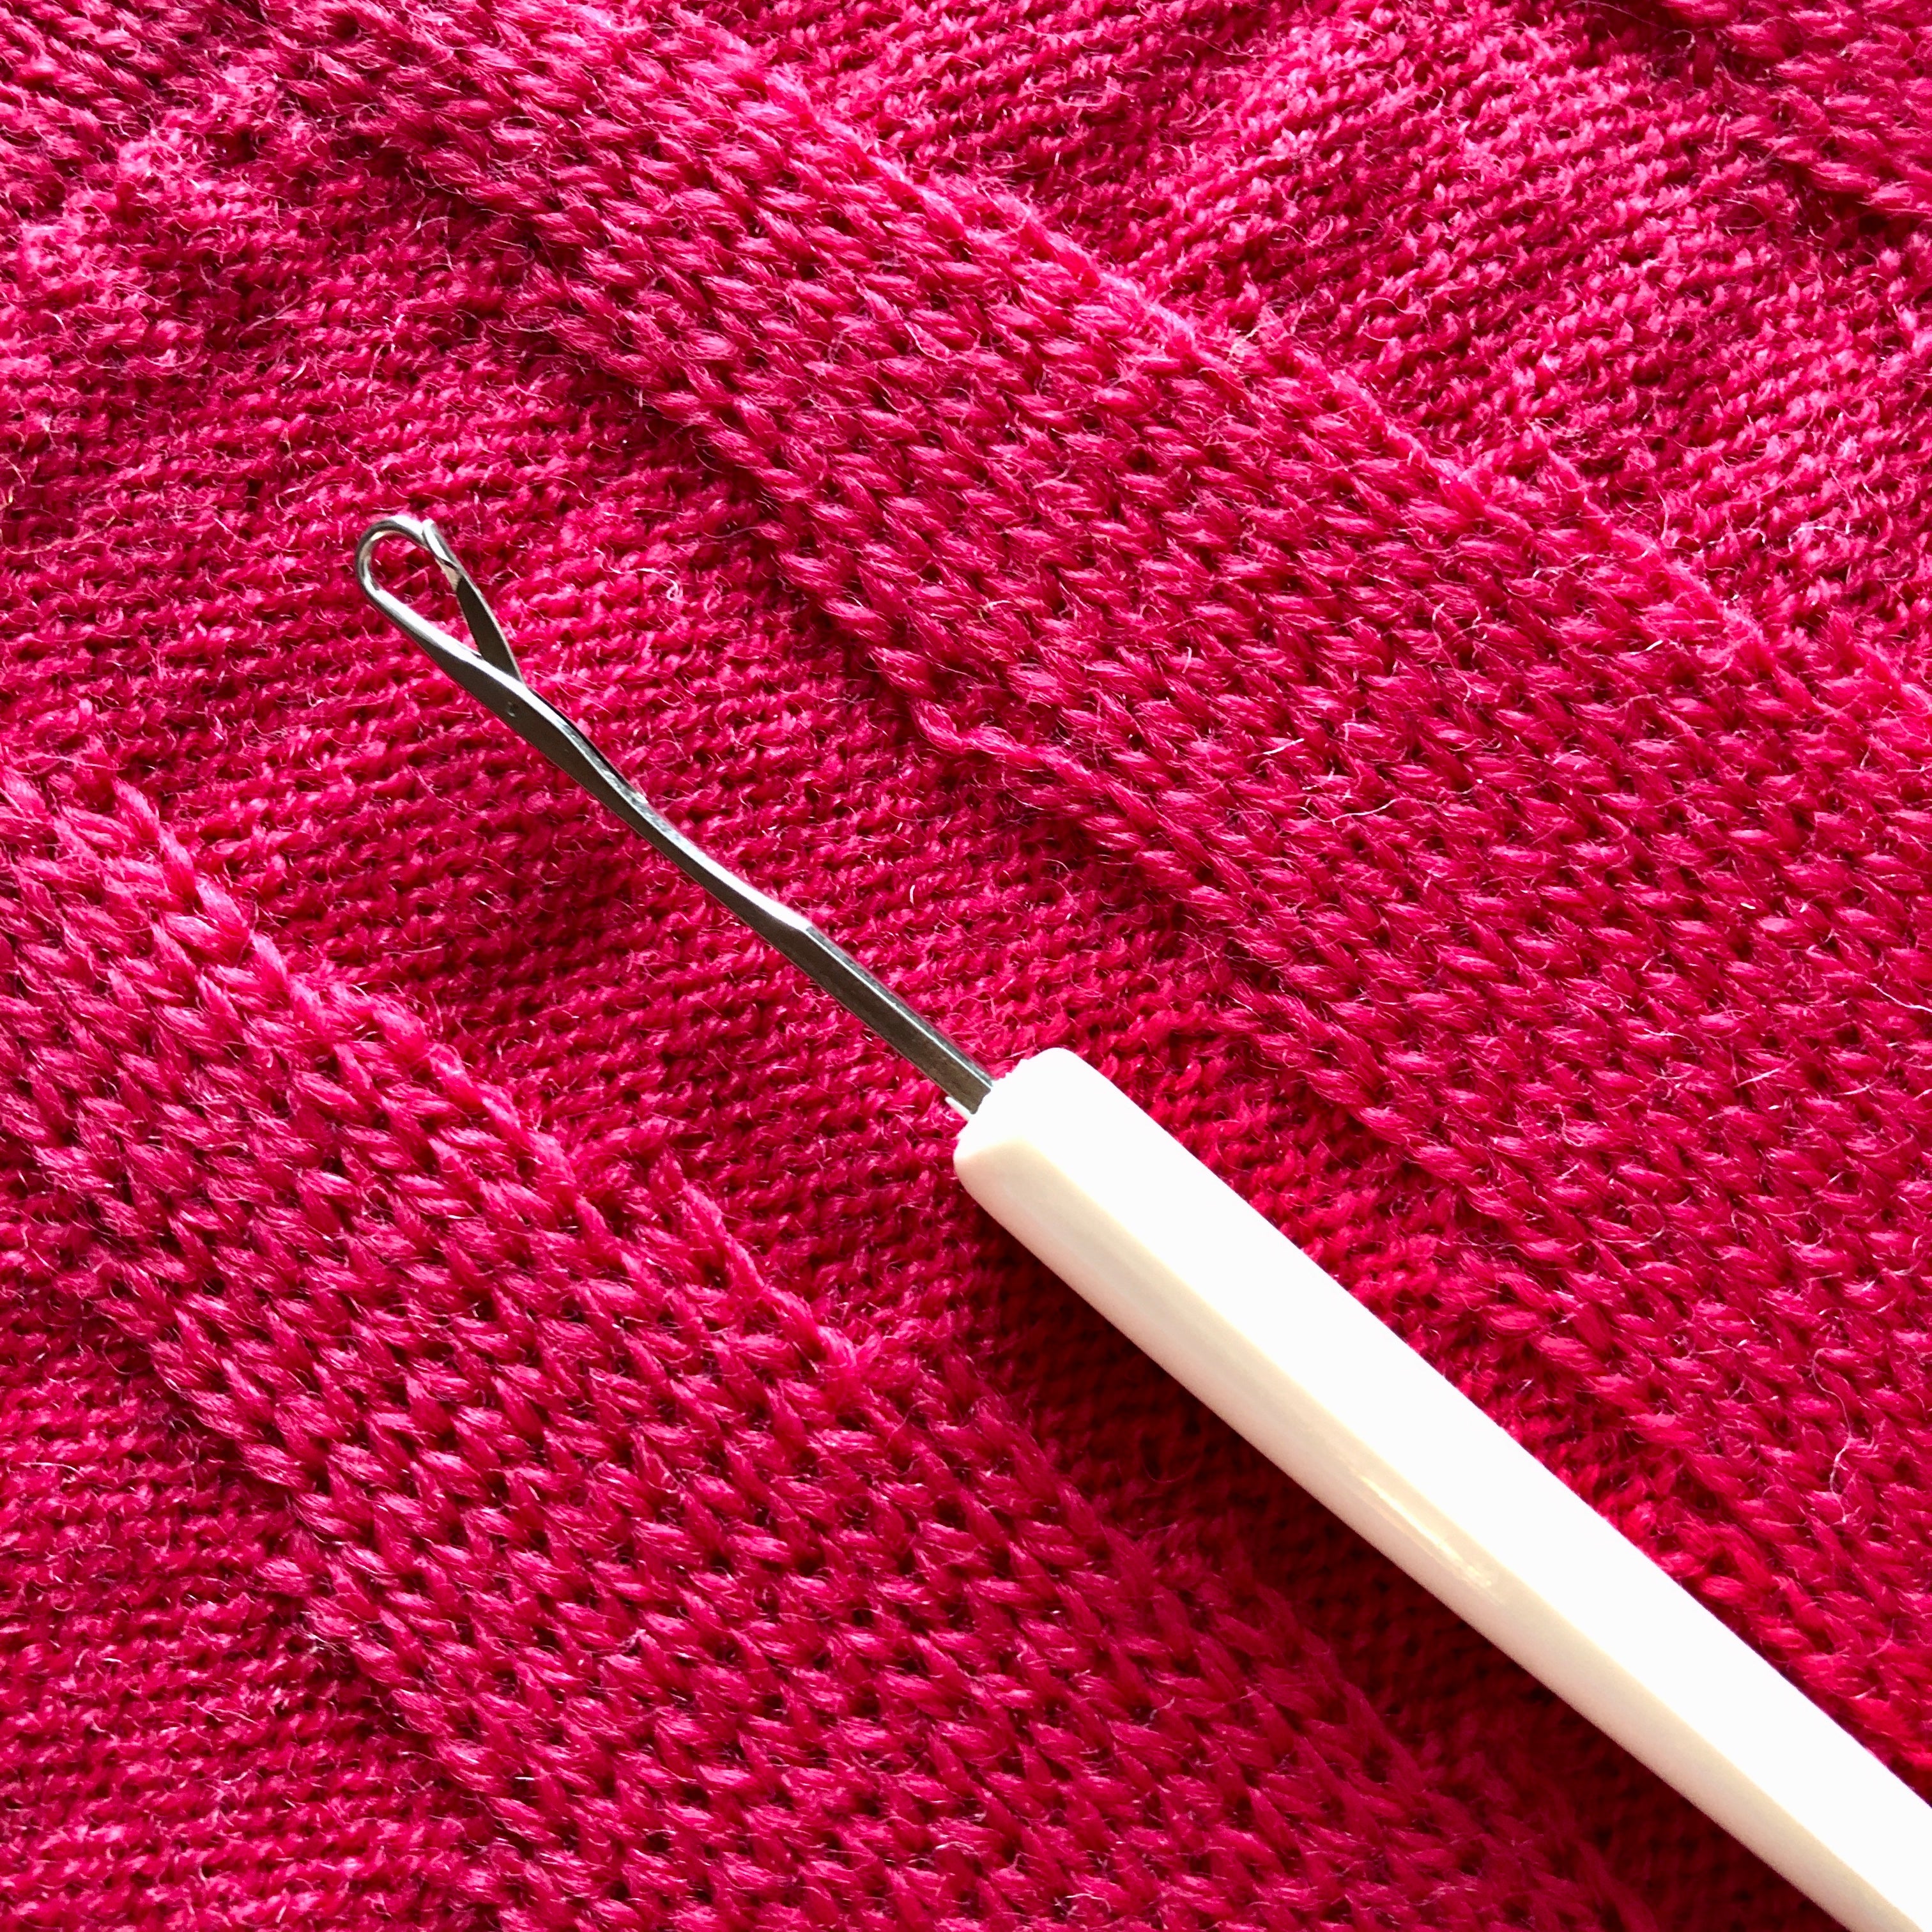 Latch Tool for Knitters